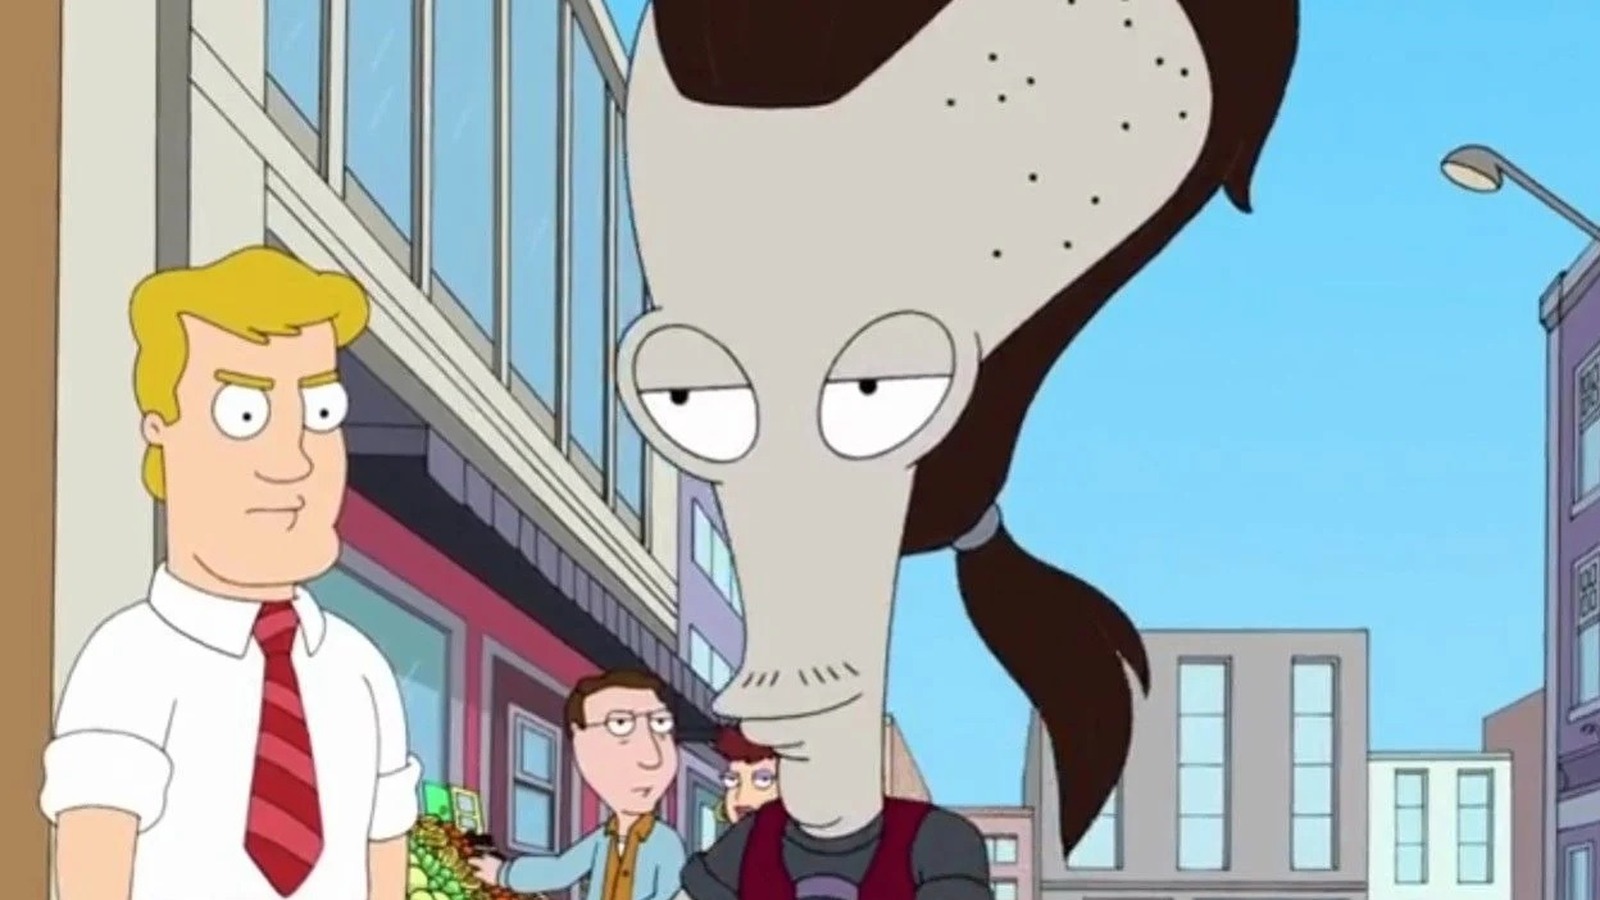 basilio lopez share pics of roger from american dad photos